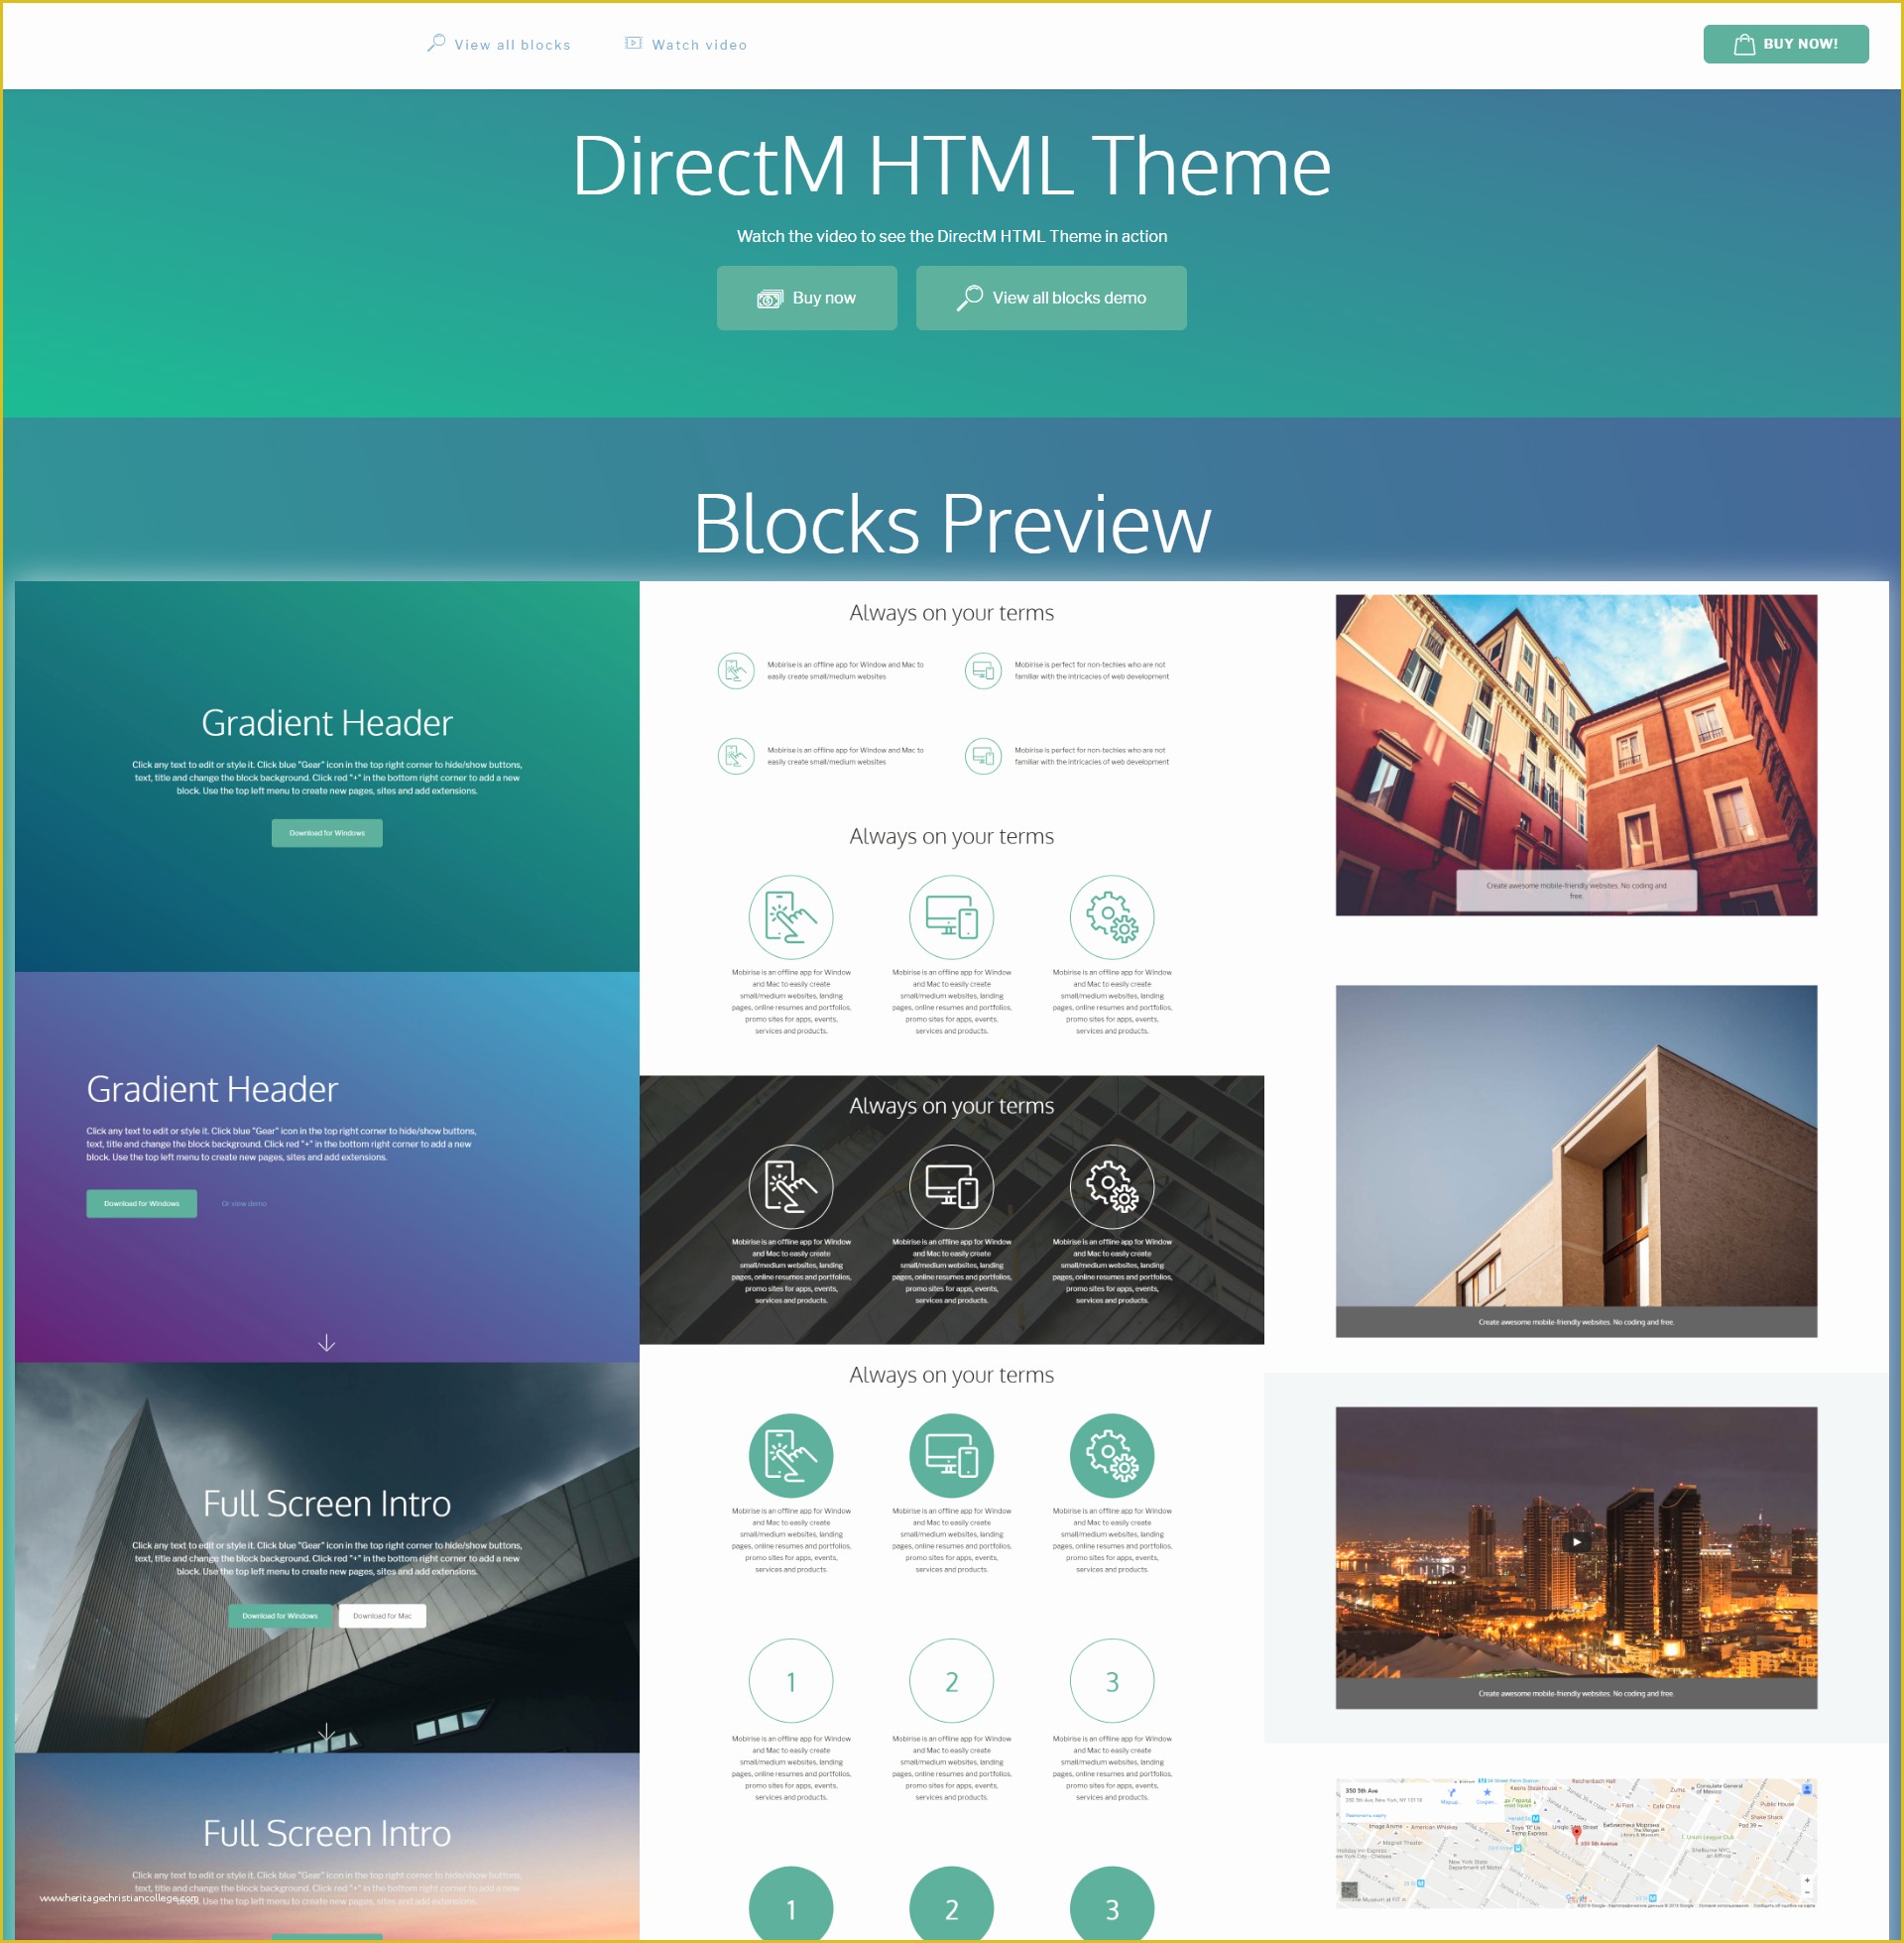 Free Bootstrap Templates 2017 Of 39 Brand New Free HTML Bootstrap Templates 2019